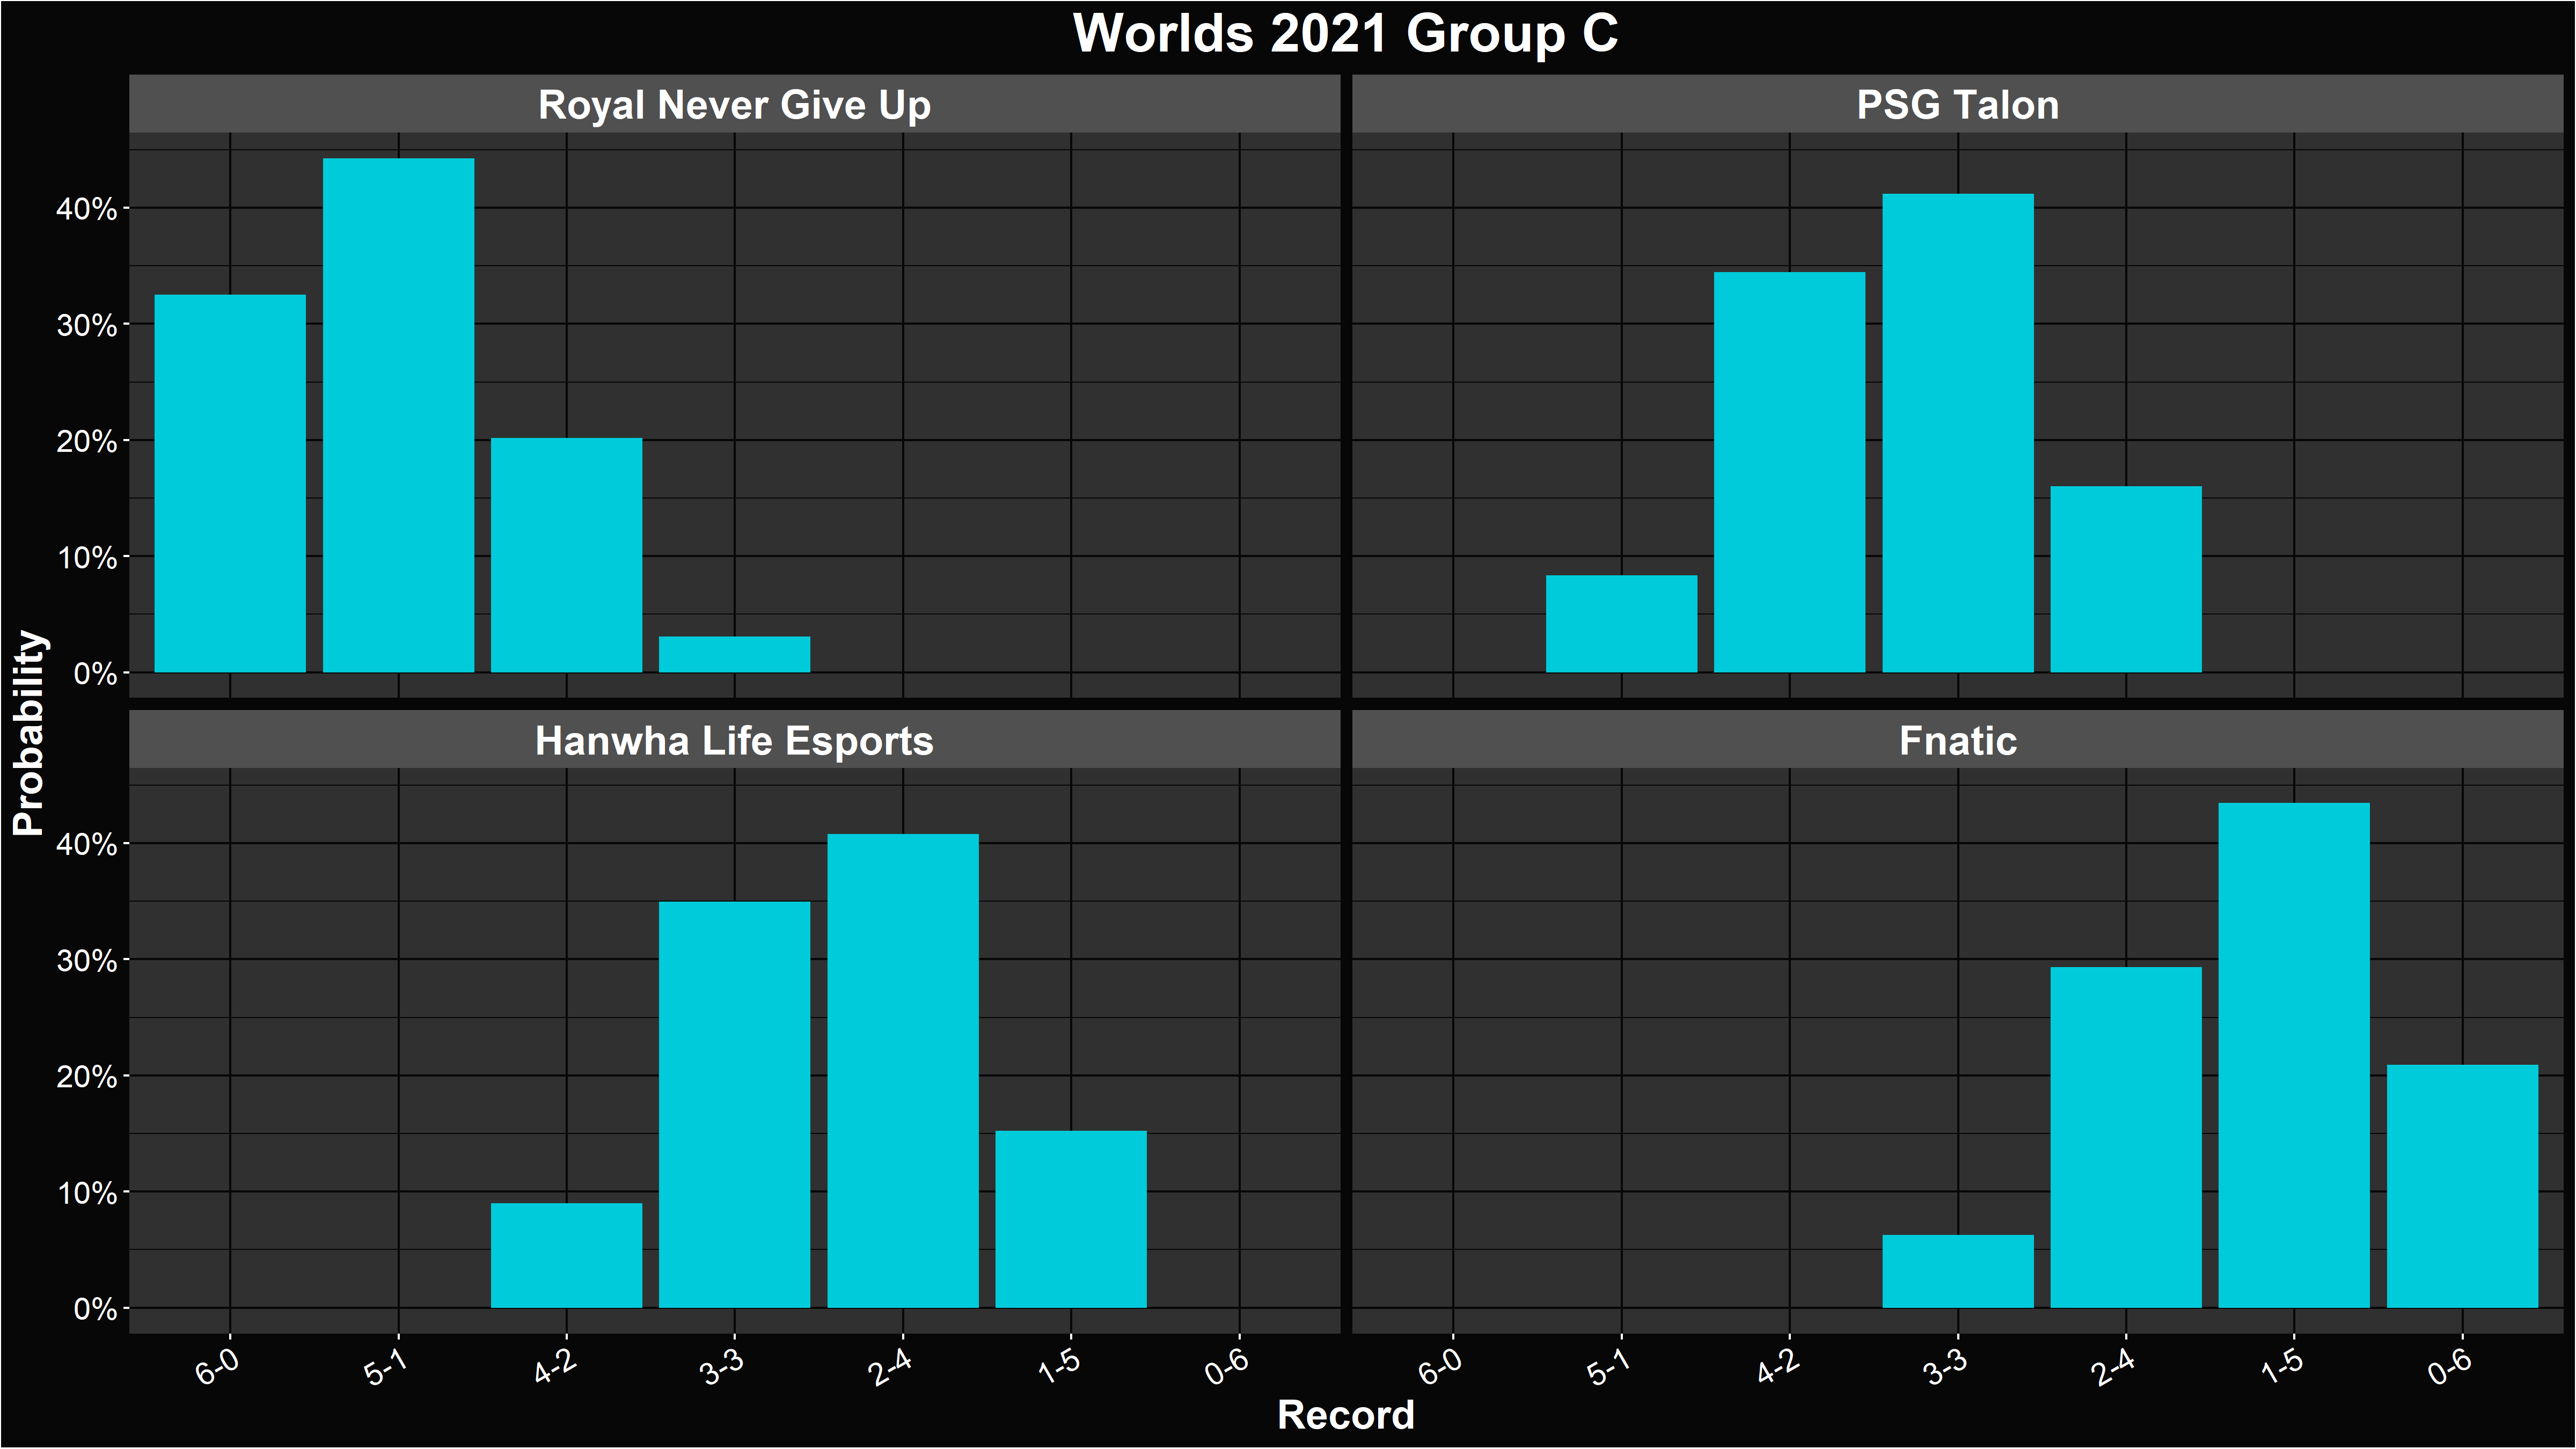 Alacrity's LoL Worlds 2021 Group C Record Distributions